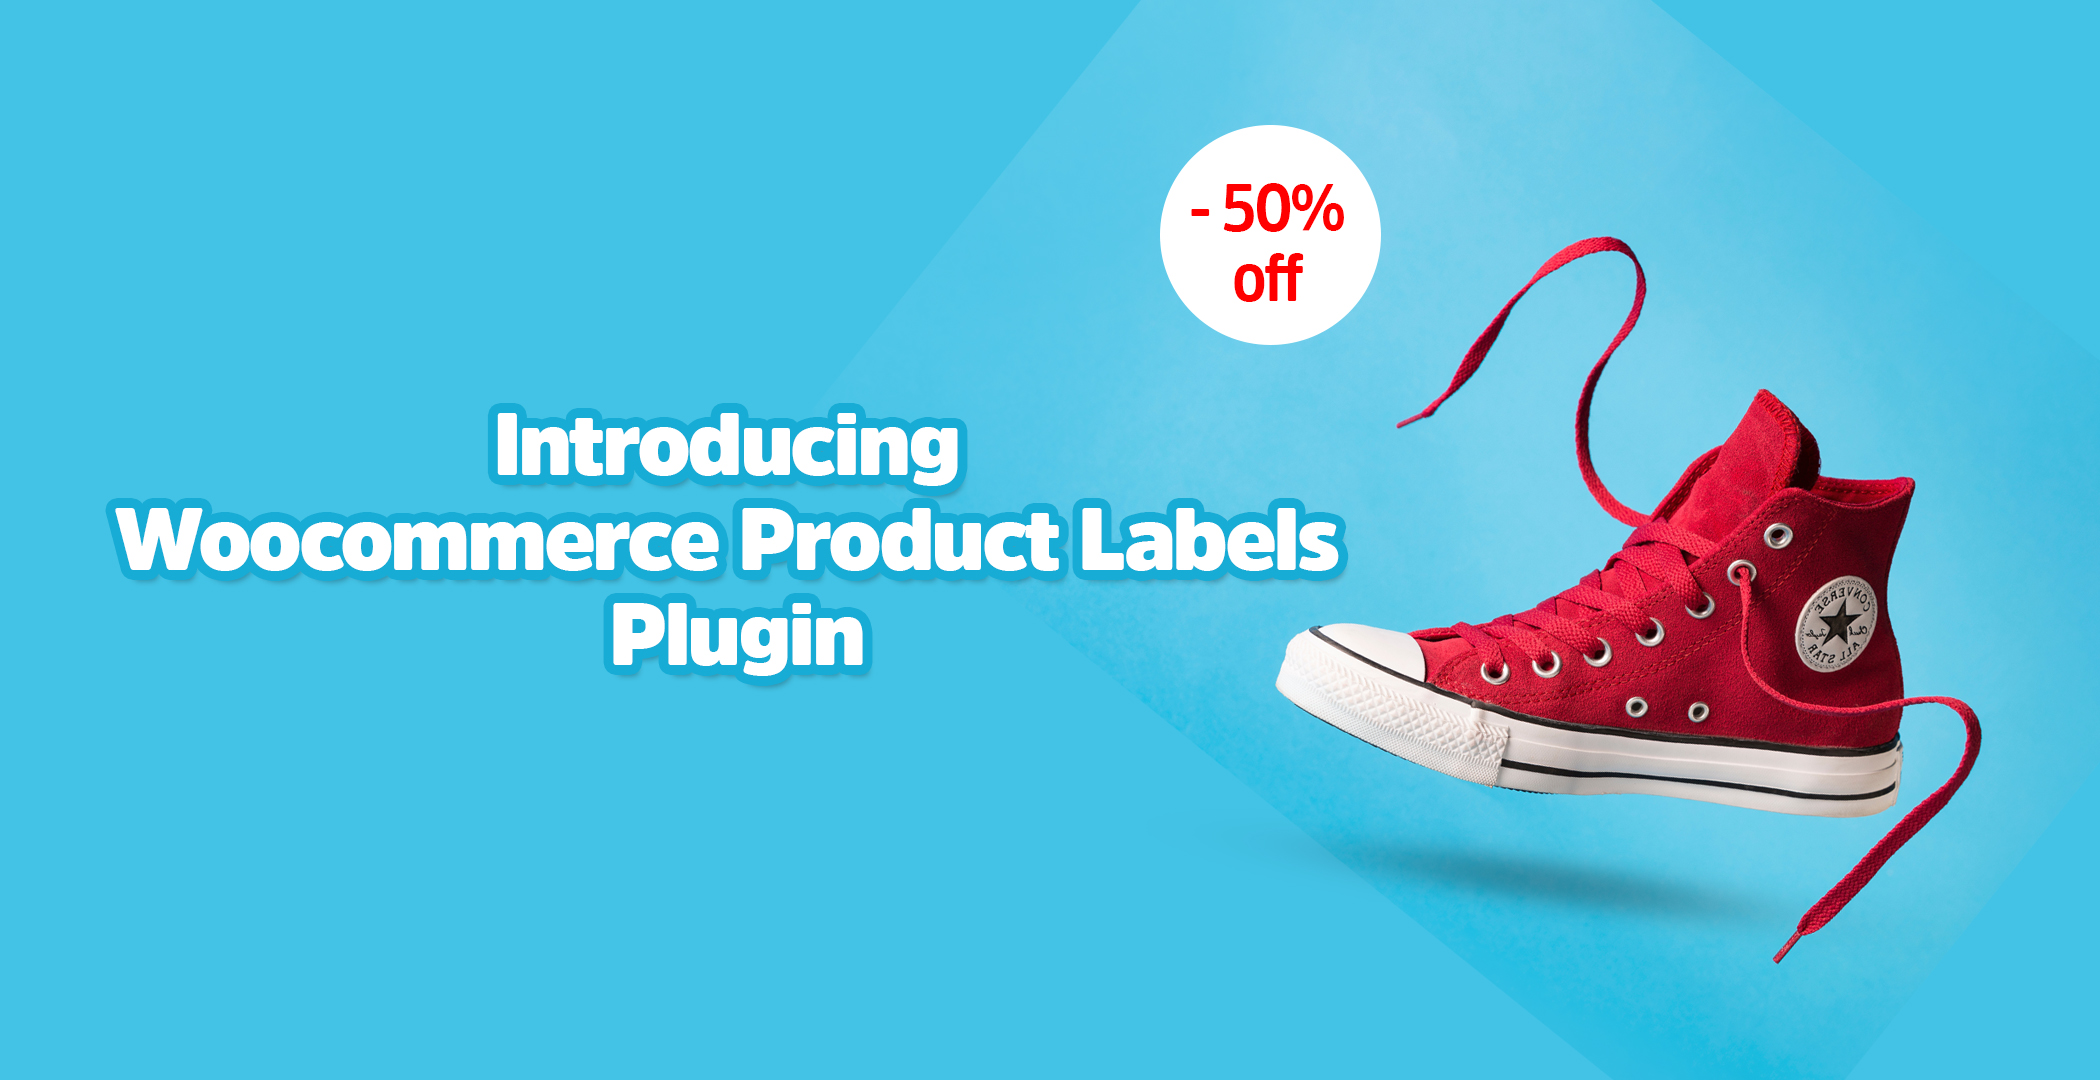 Introducing Woocommerce Product Labels Plugin